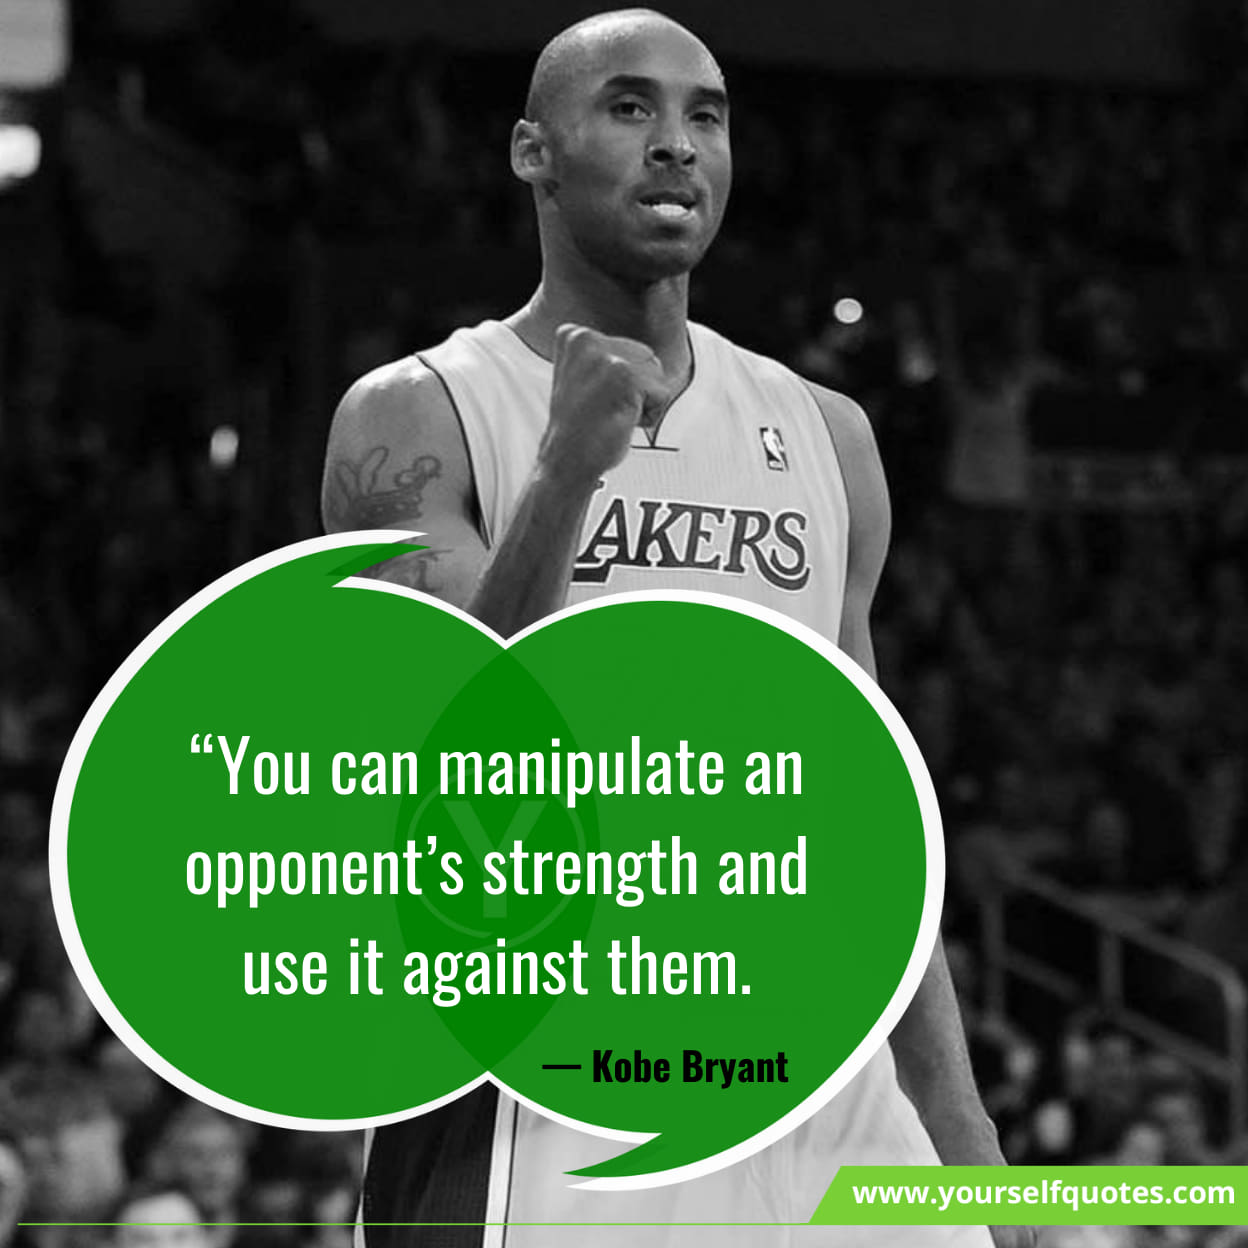 Kobe Bryant Quotes About Basketball